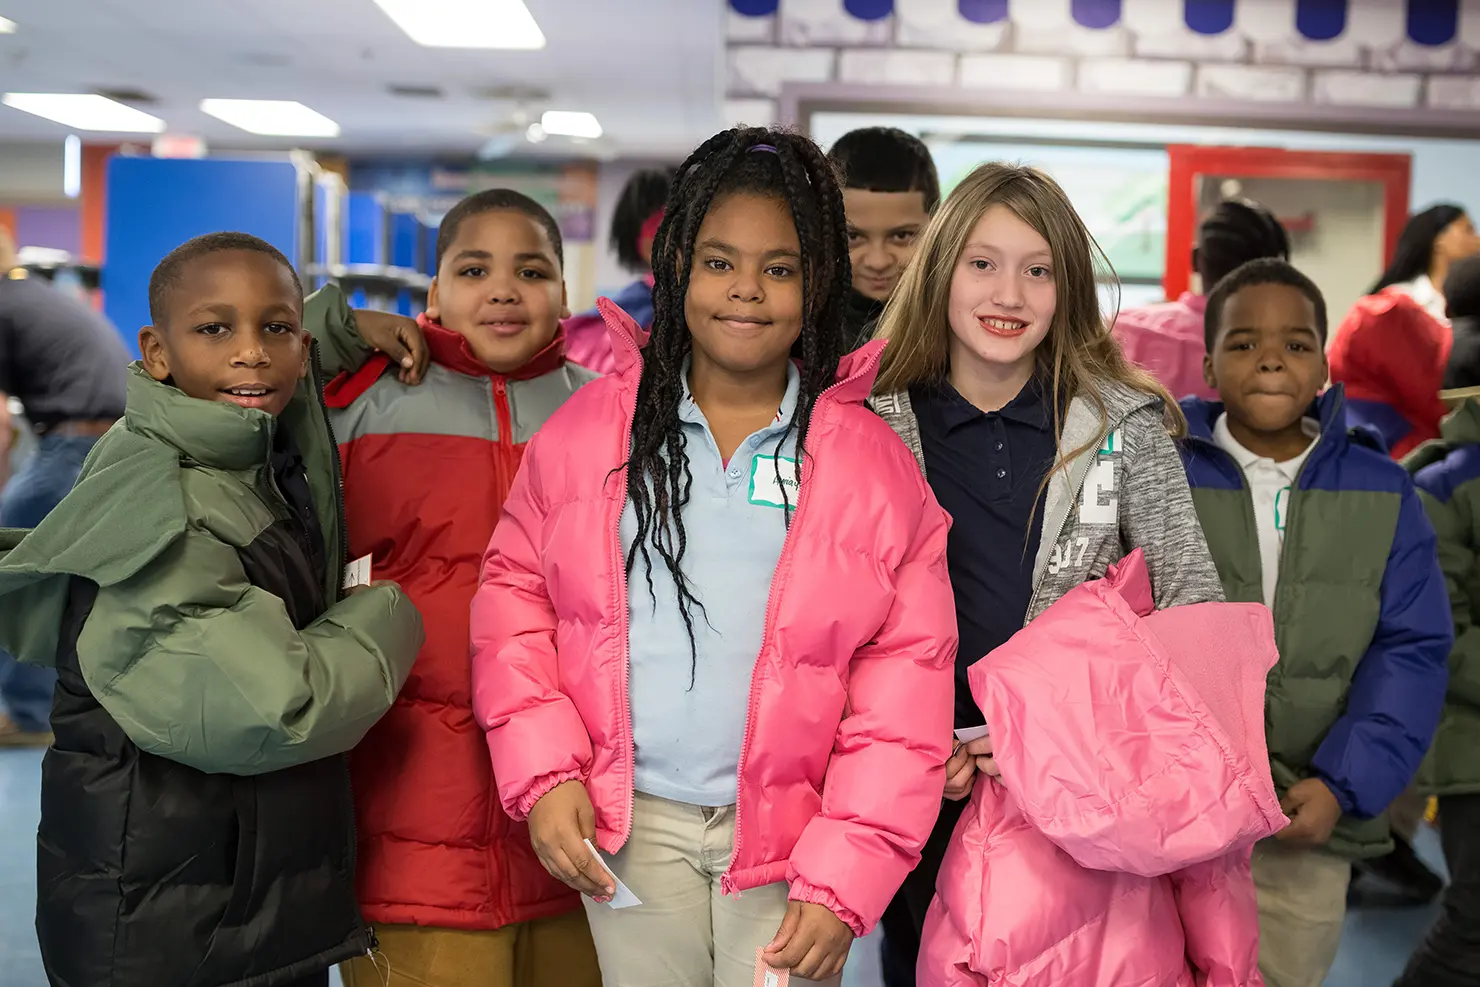 Delaware KIDS Fund / Harvey, Hanna & Associates Camp out & deliver over 2,000 Coats to 5 local Elementary Schools